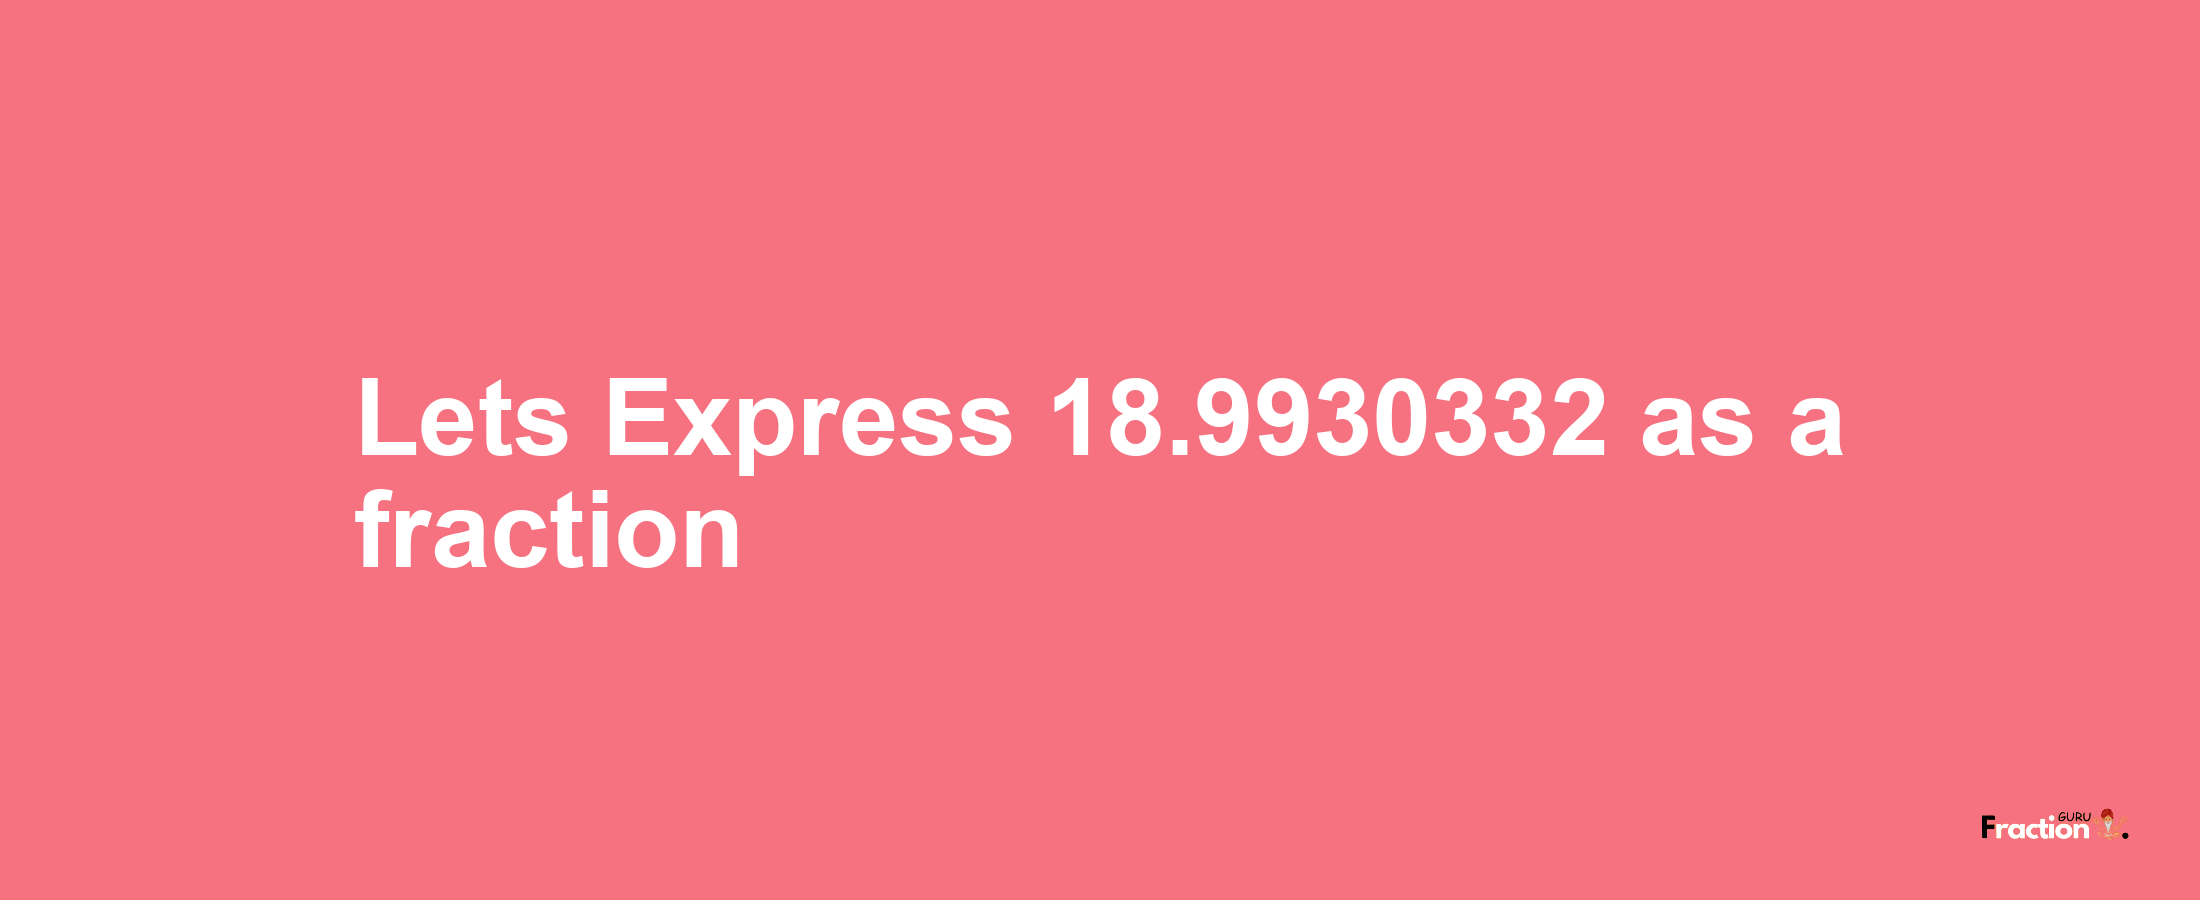 Lets Express 18.9930332 as afraction